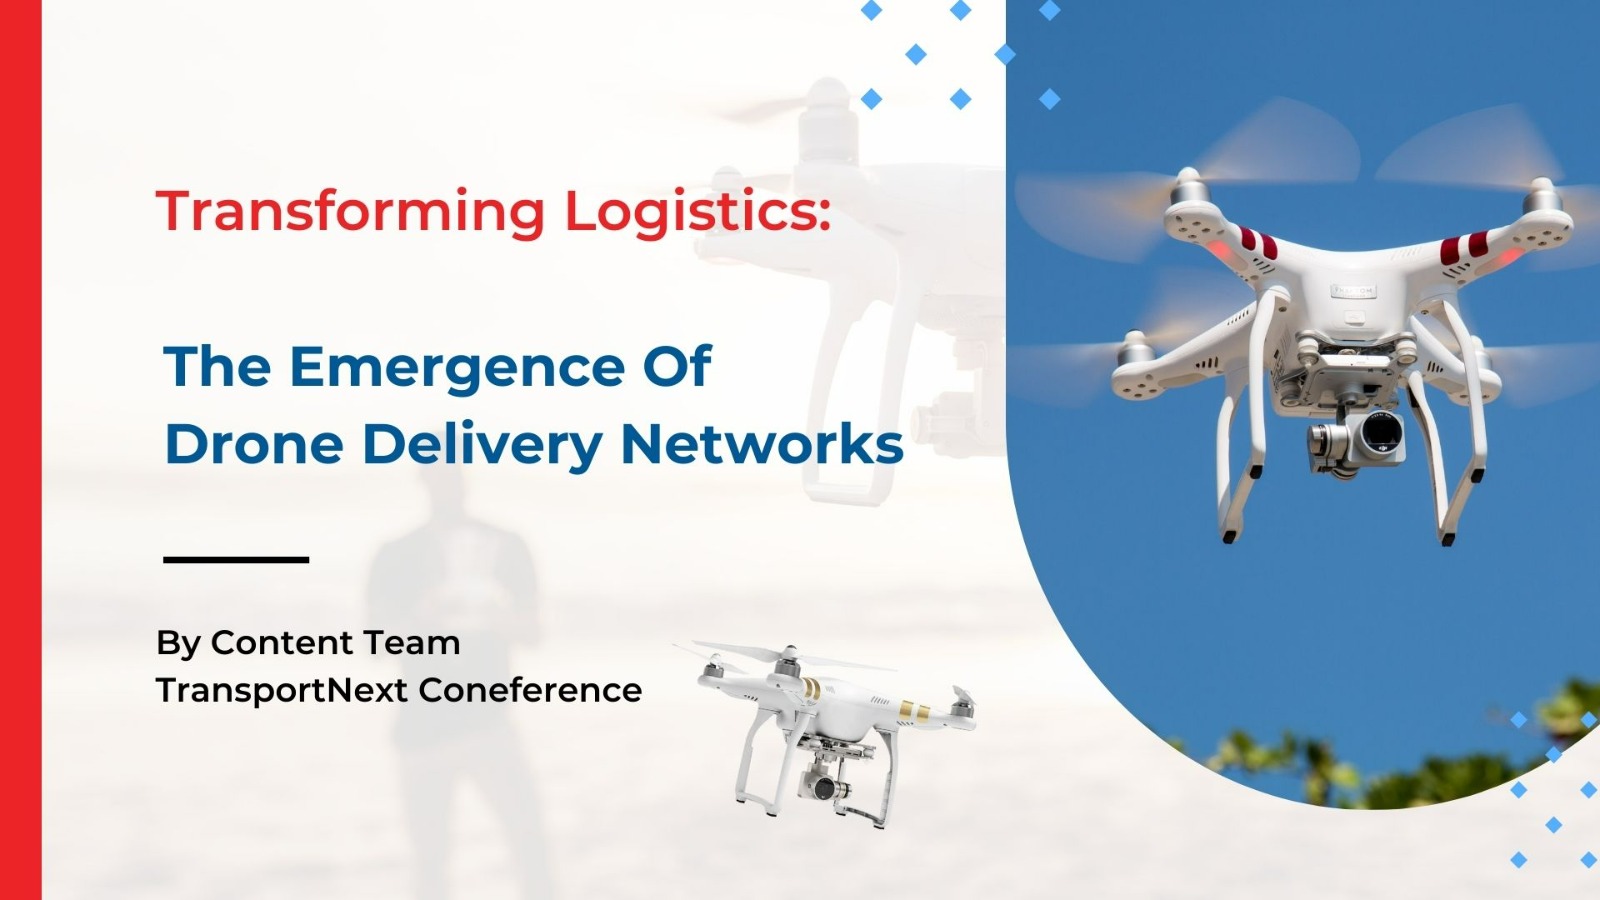 Emergence Of Drone Delivery Networks